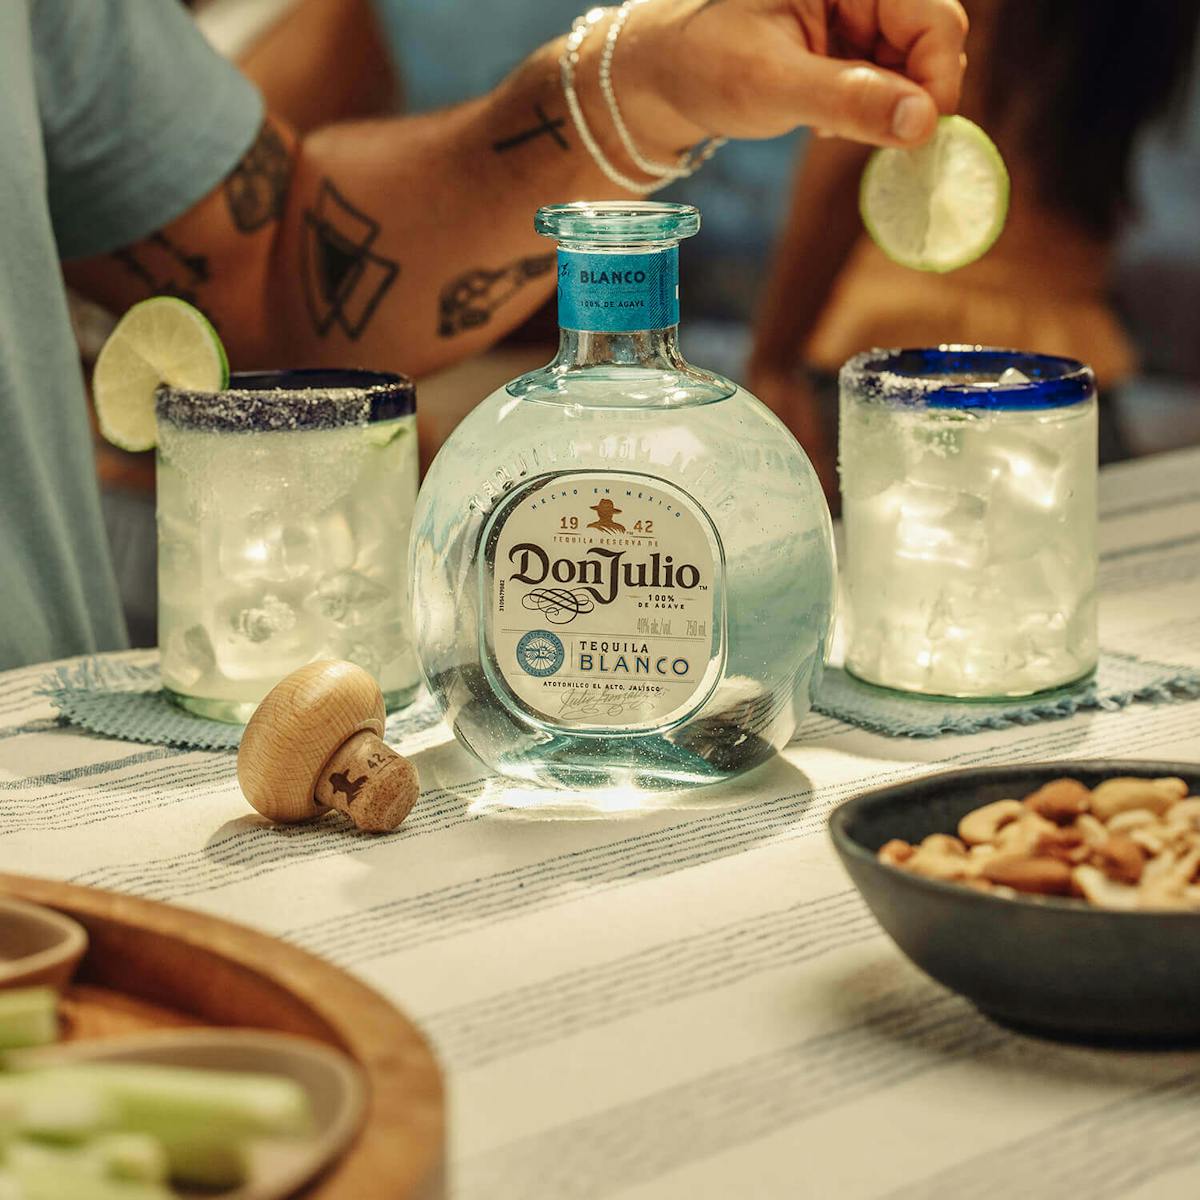 Don Julio Margarita drink made with Don Julio Blanco Tequila